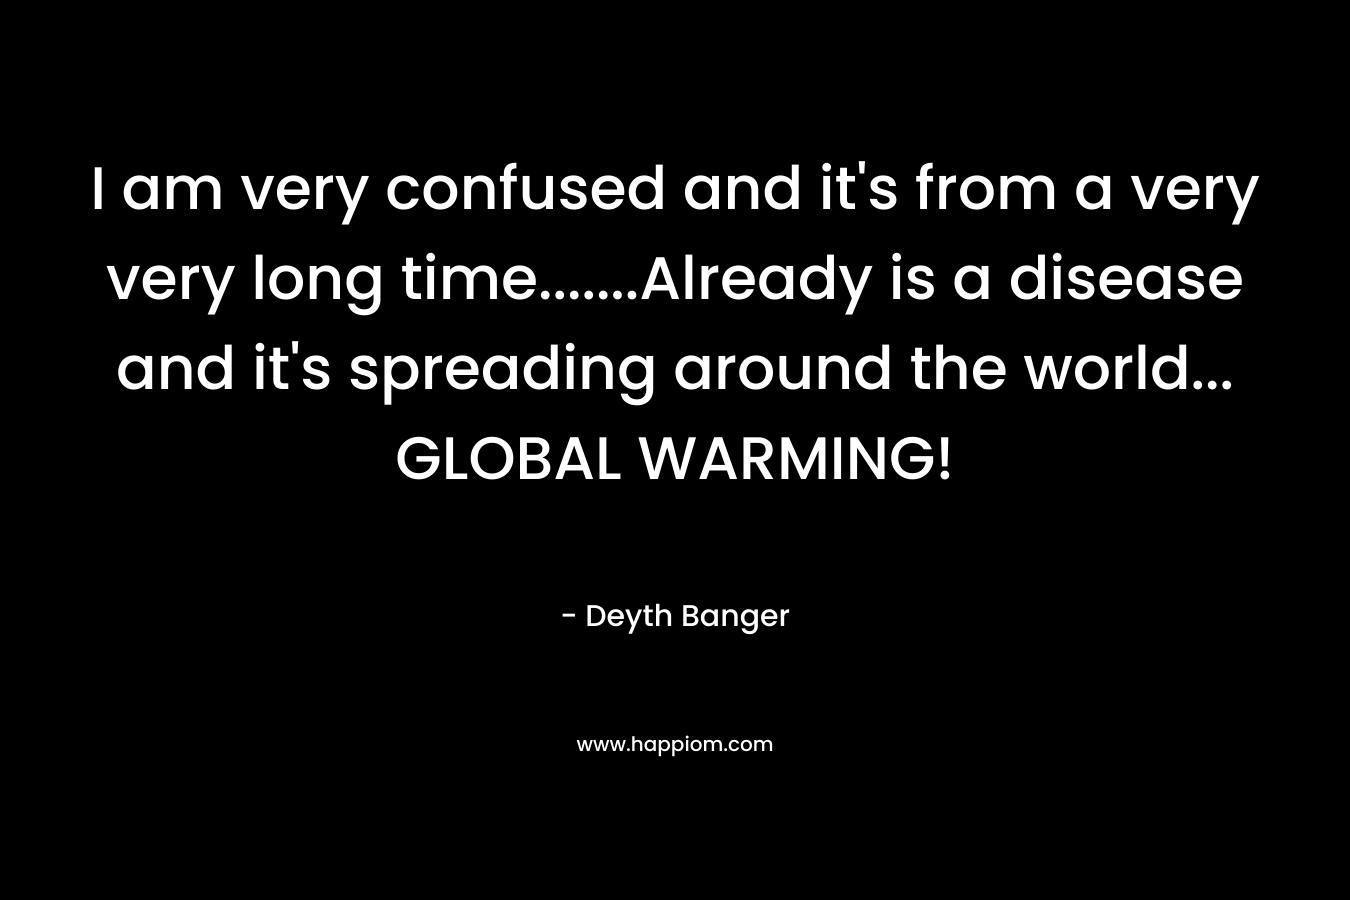 I am very confused and it's from a very very long time.......Already is a disease and it's spreading around the world... GLOBAL WARMING!